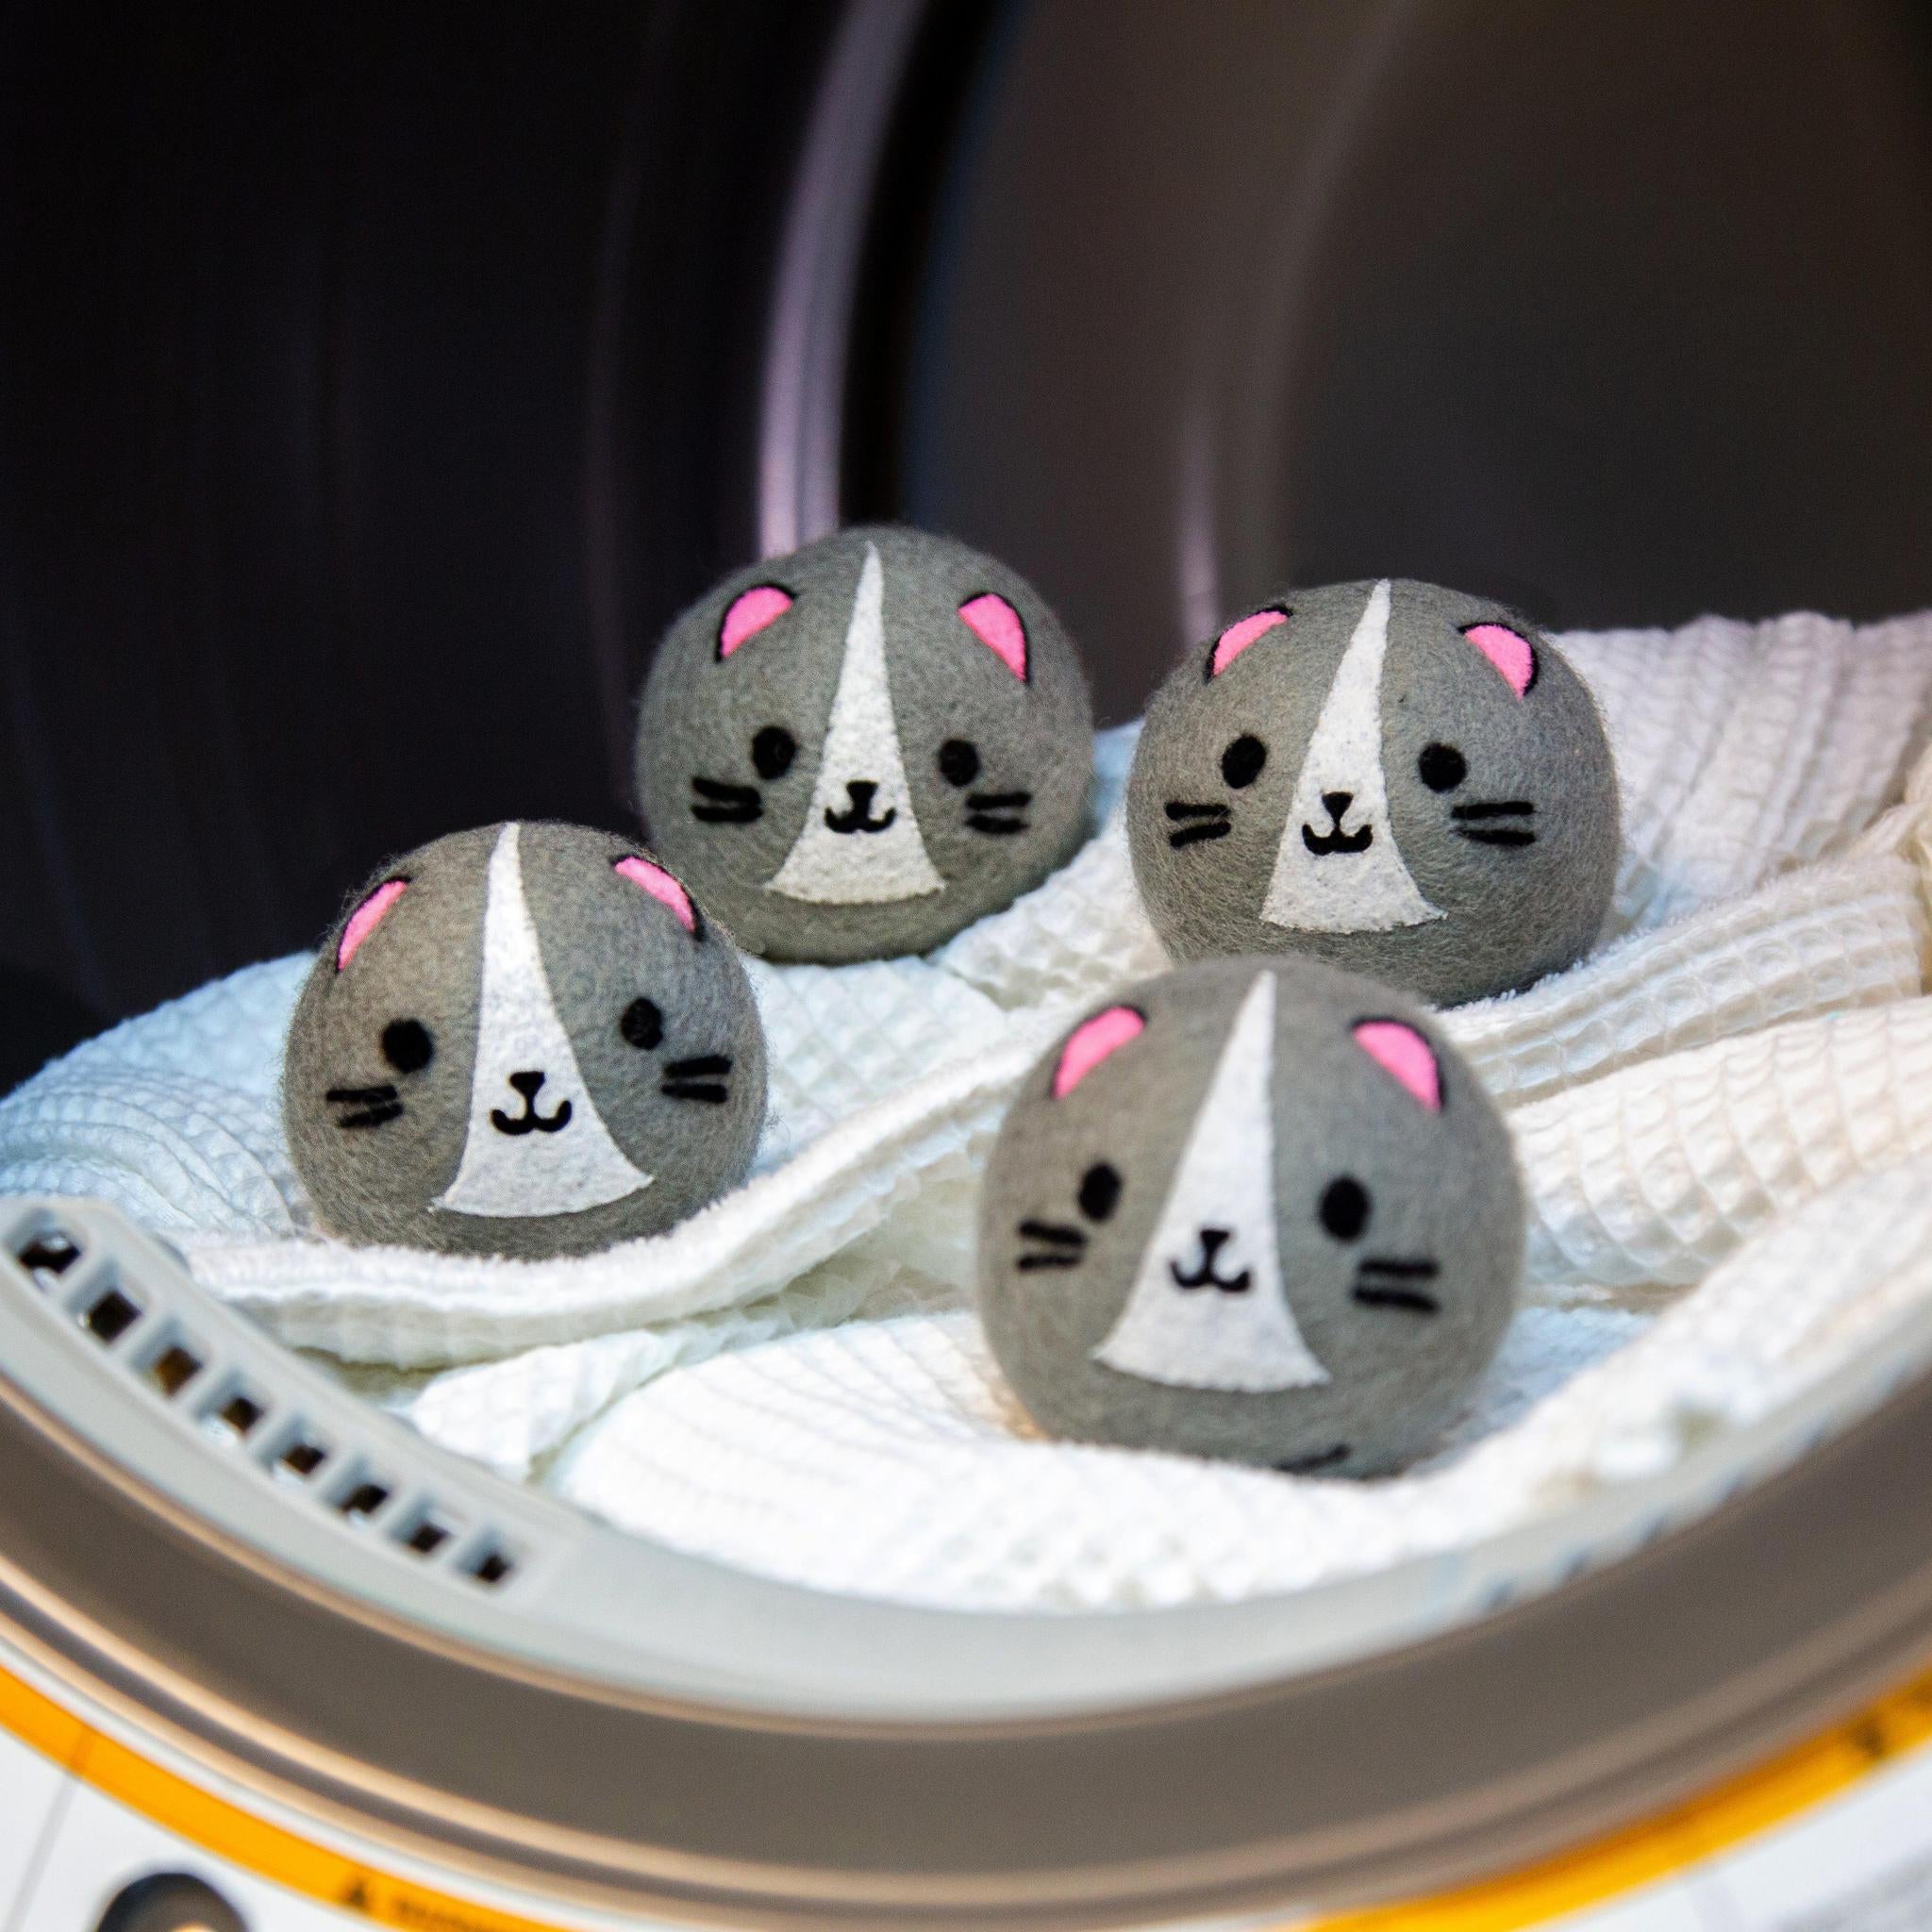 Cat Dryer Buddies 4 Wool Laundry Balls for Eco-Friendly, Soft, and Wrinkle-Free Clothes